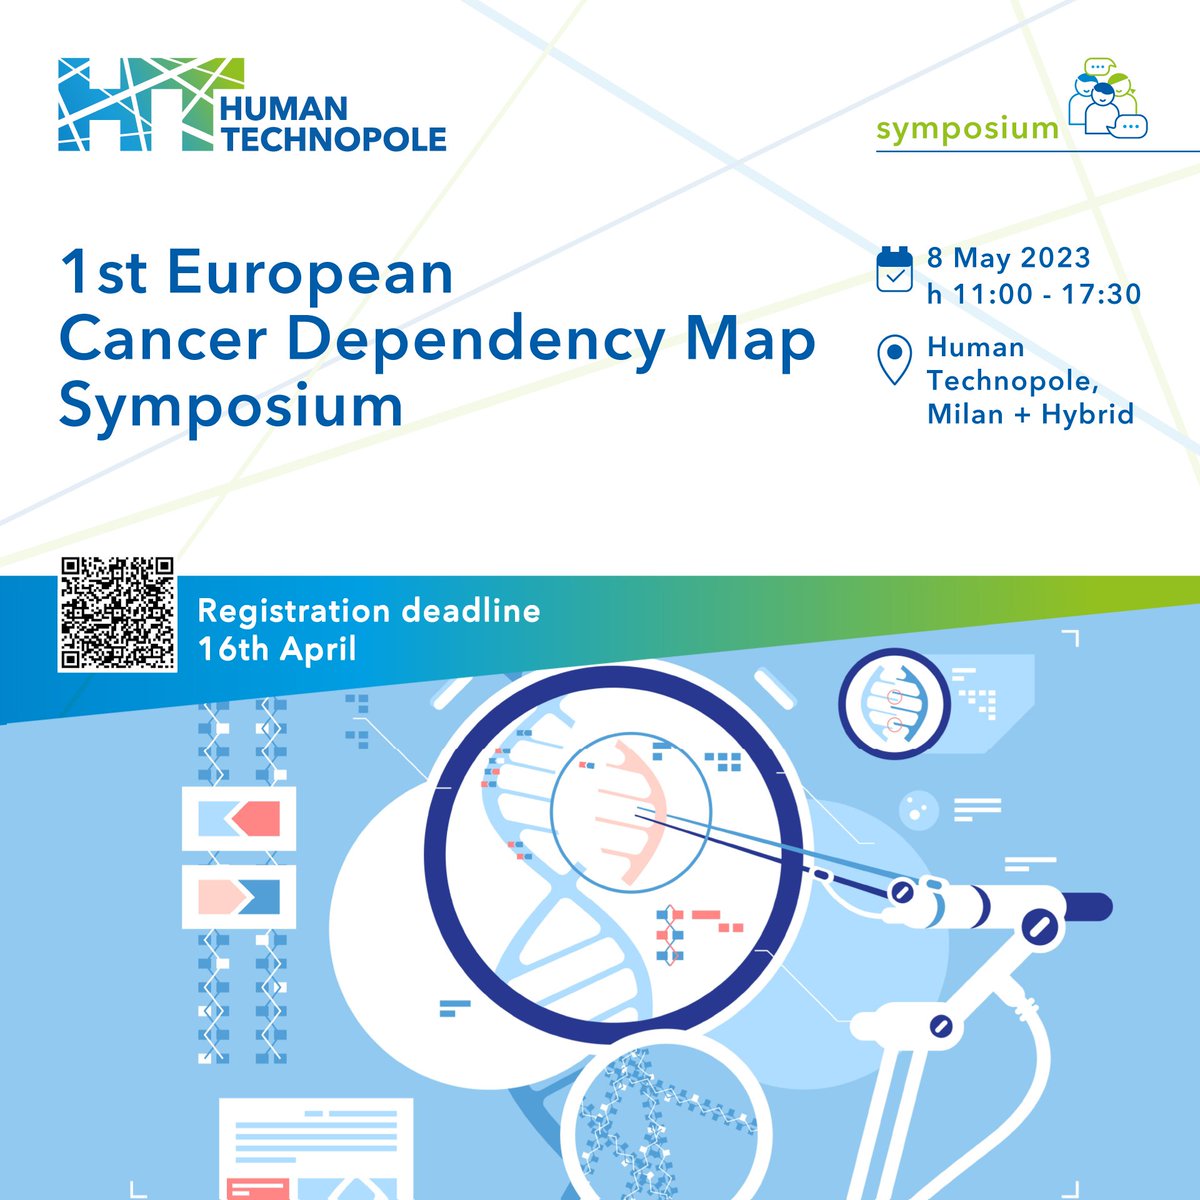 Join us at @humantechnopole for a great day of talks, discussions, poster presentations and network opportunities. Amazing lineup of speakers - a must if you like functionalGenetics/pharmacogenomics, oncology targetValidation and CancerDependencies (w @DepMapSanger @CancerDepMap) https://t.co/AK6IJRyYOh